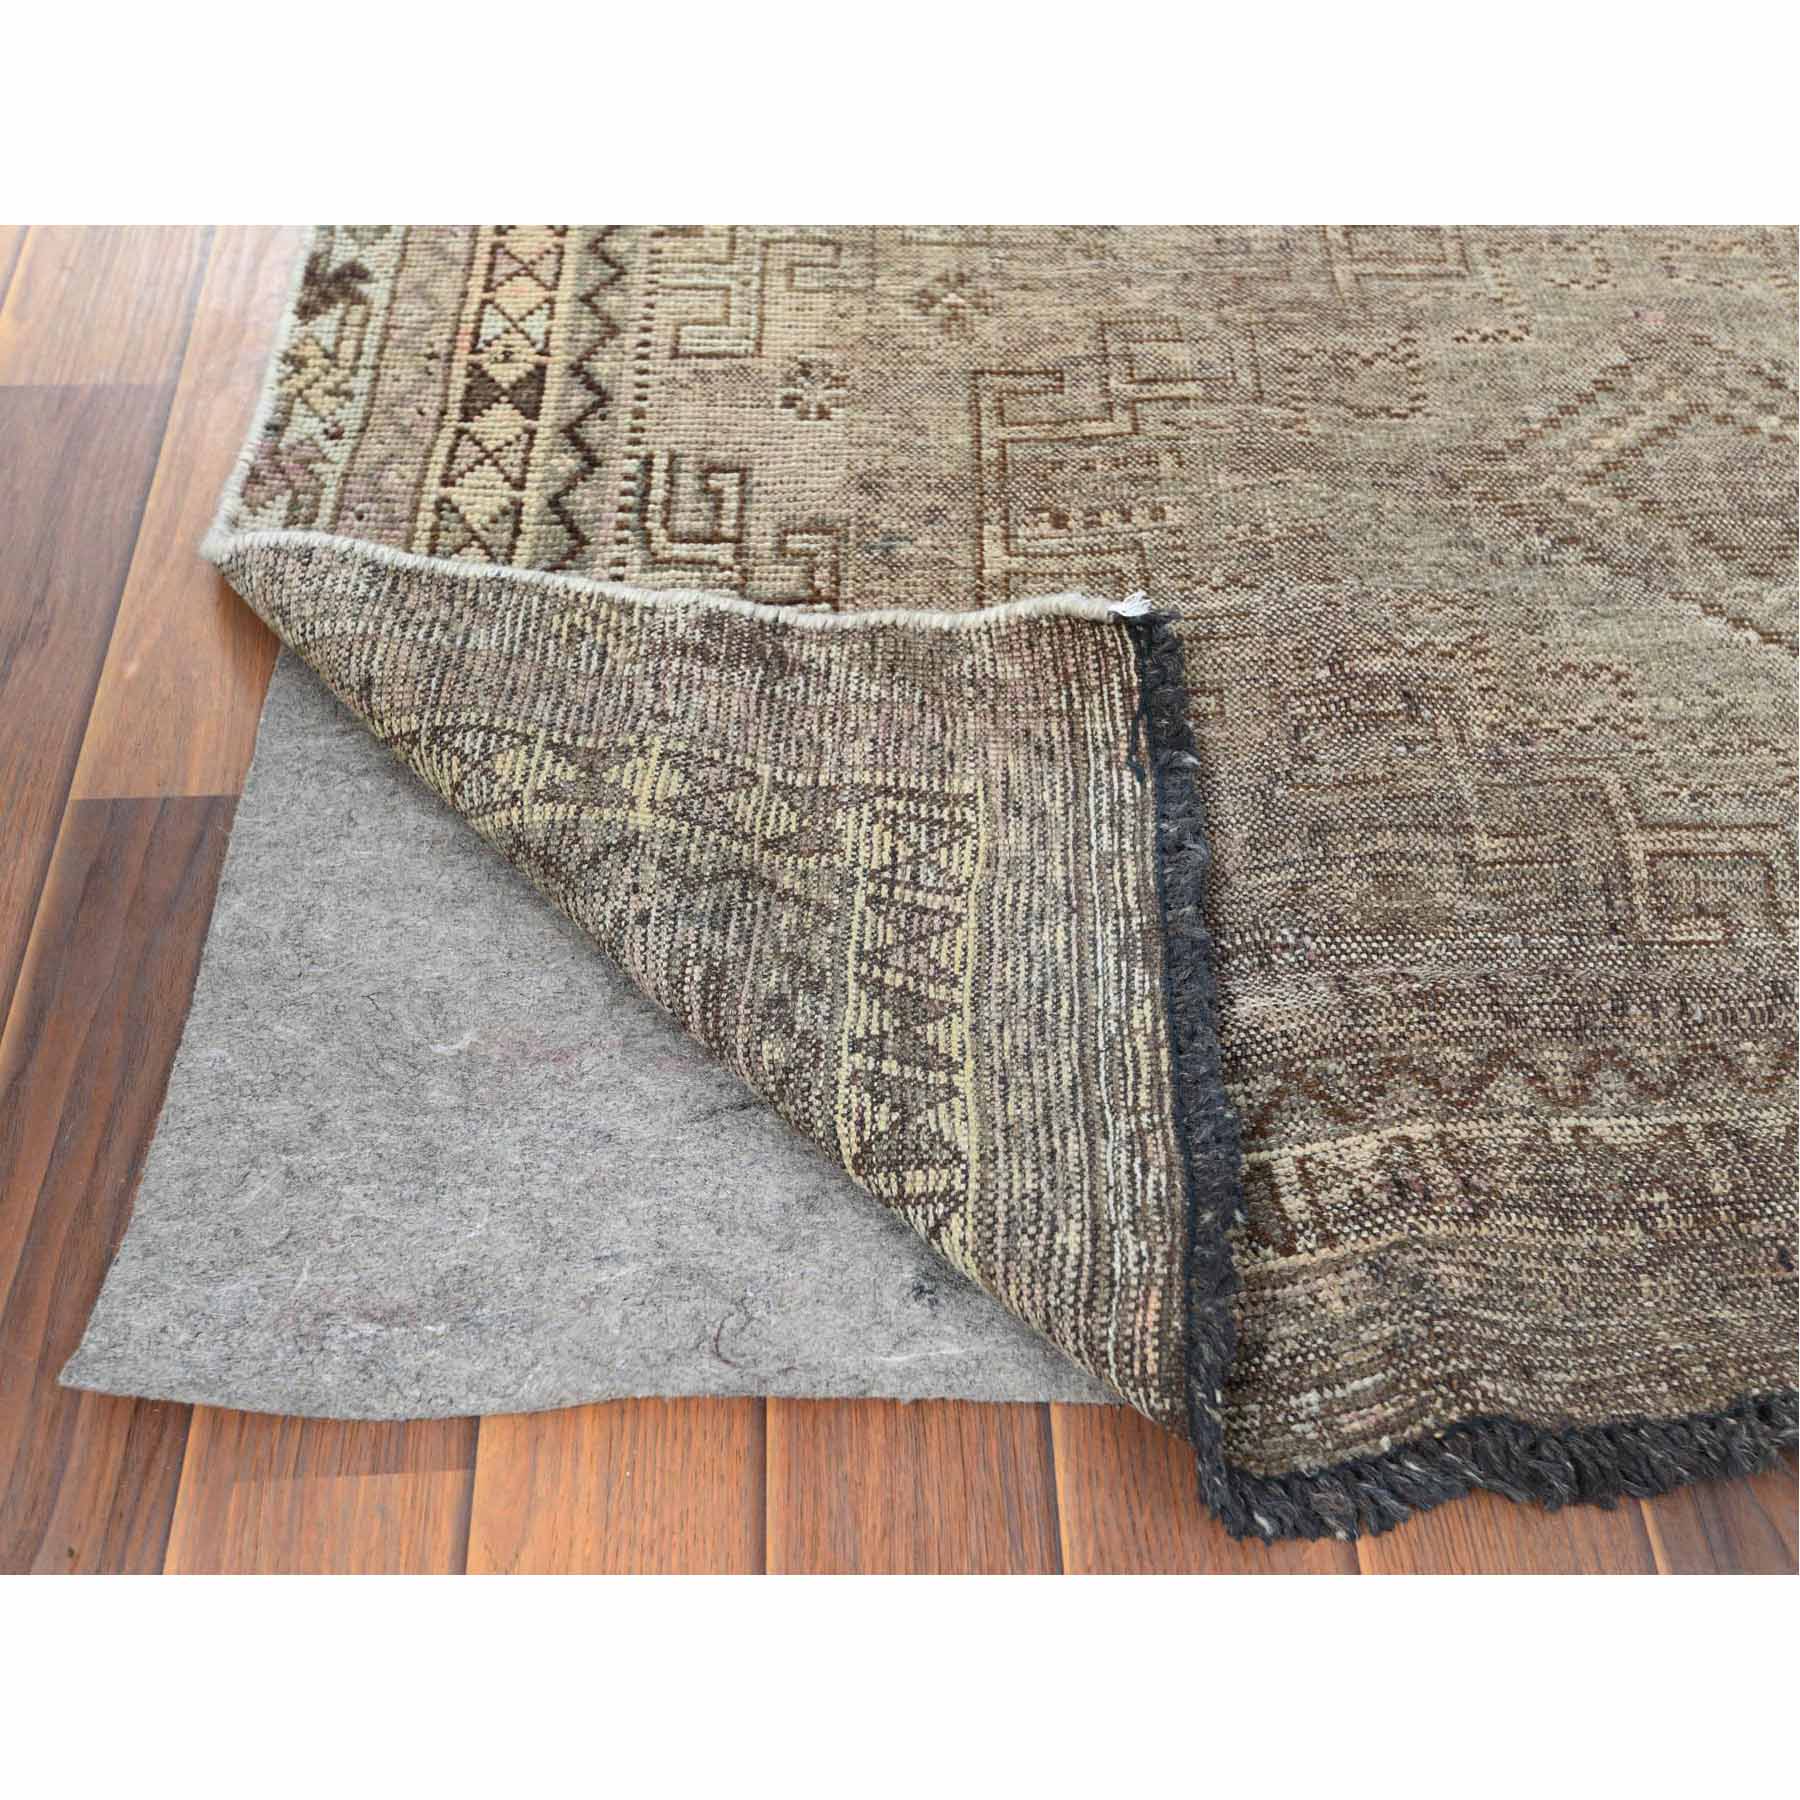 Overdyed-Vintage-Hand-Knotted-Rug-302765